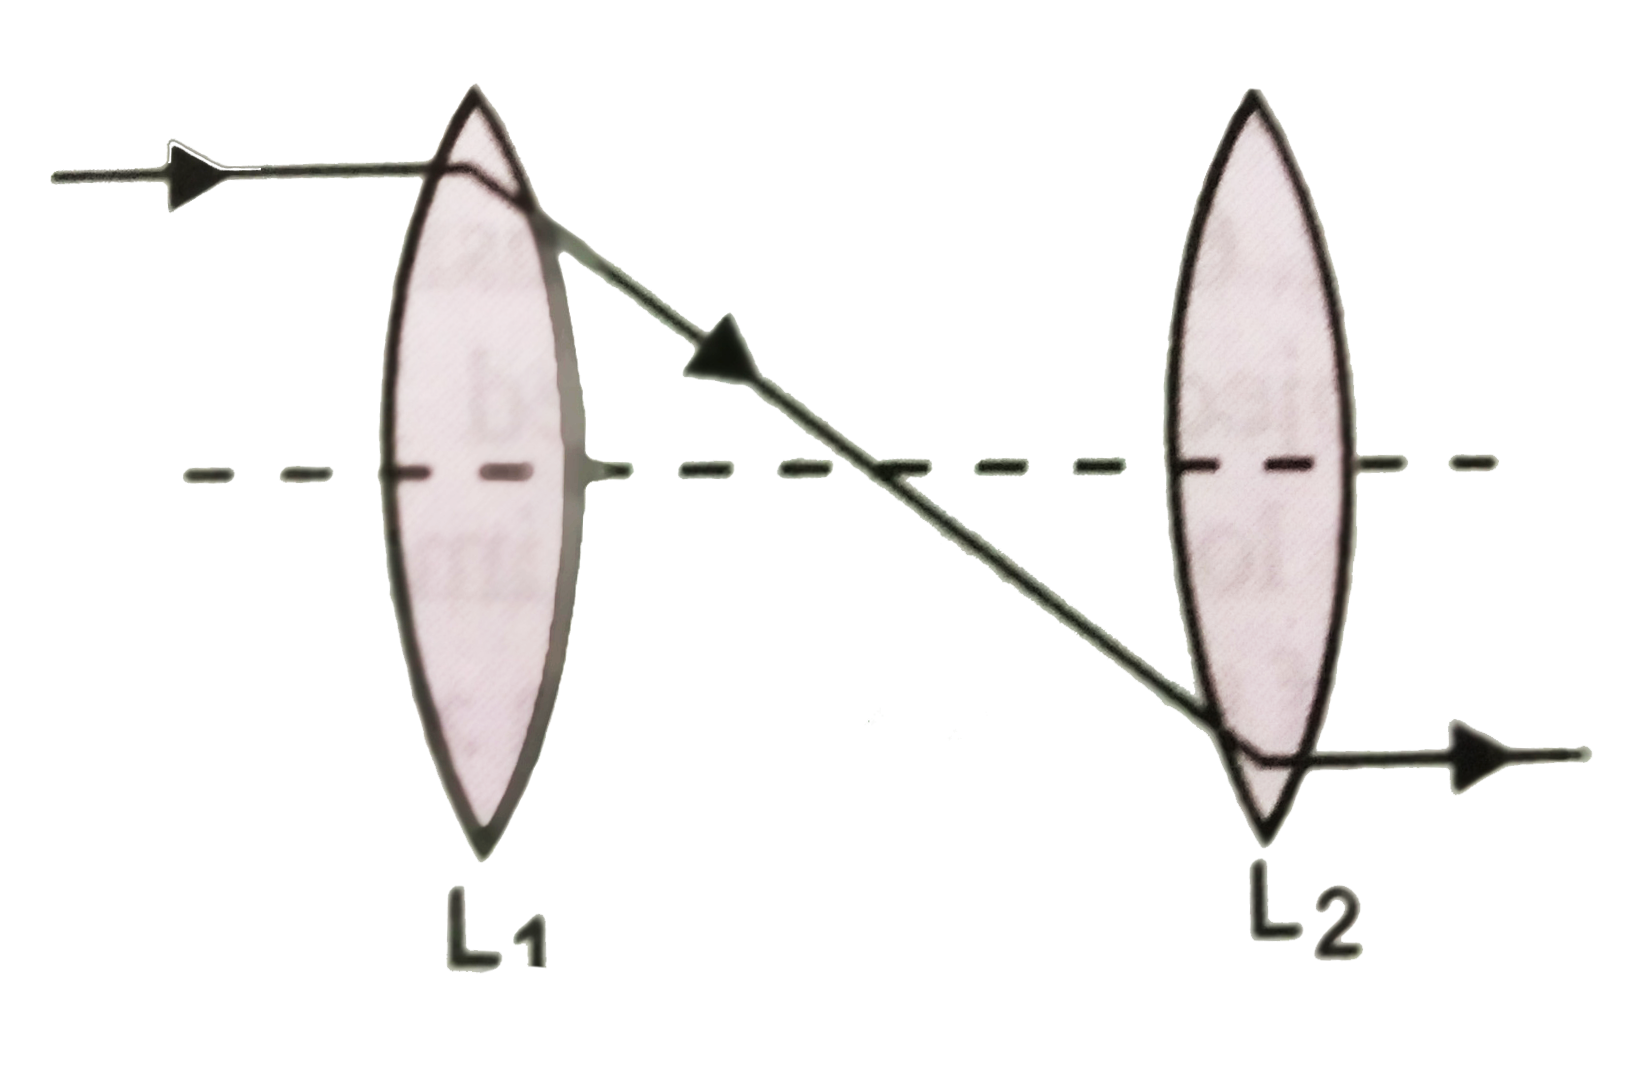 In Fig., there are two convex lenses L(1) and L(2) having focal lengths F(1) and F(2) respectively. The distance between L(1) and L(2) will be :